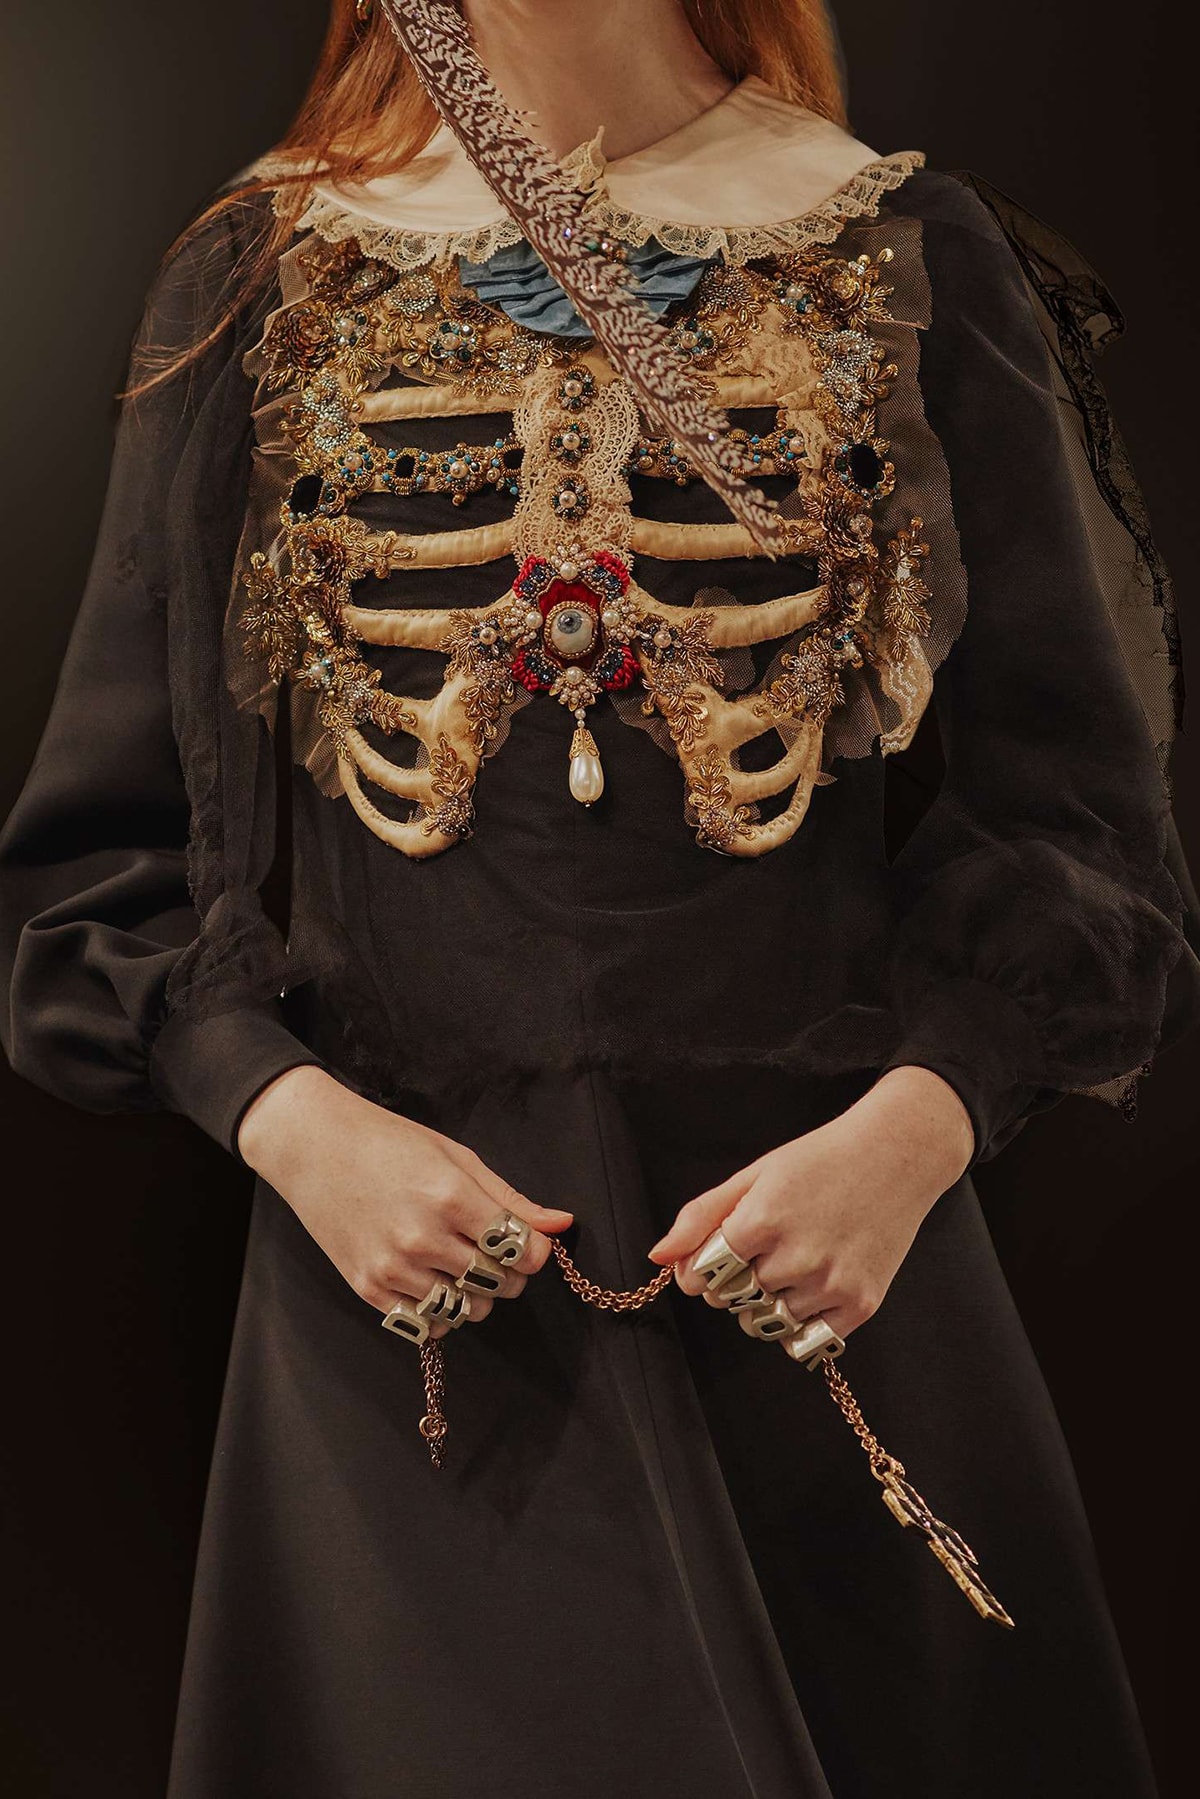 Gucci Cruise 2019 Runway Details Skeleton Jewelry Accessories Rings